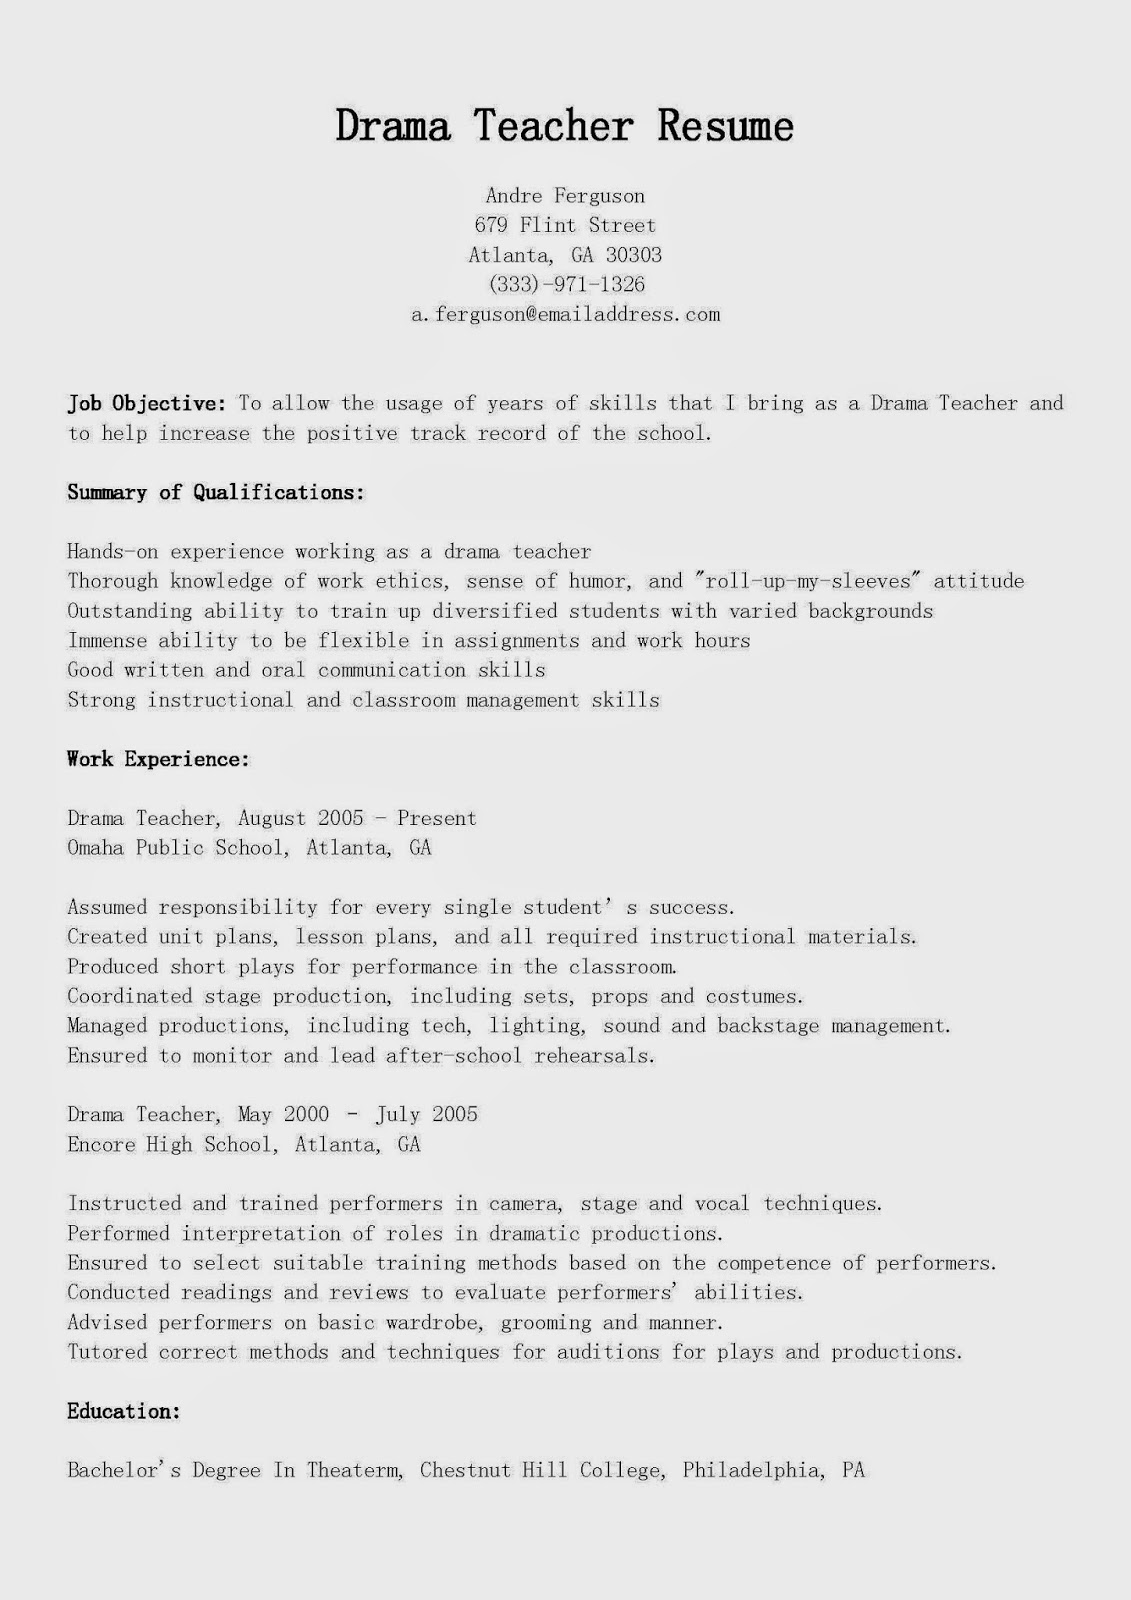 How to write an artists resume